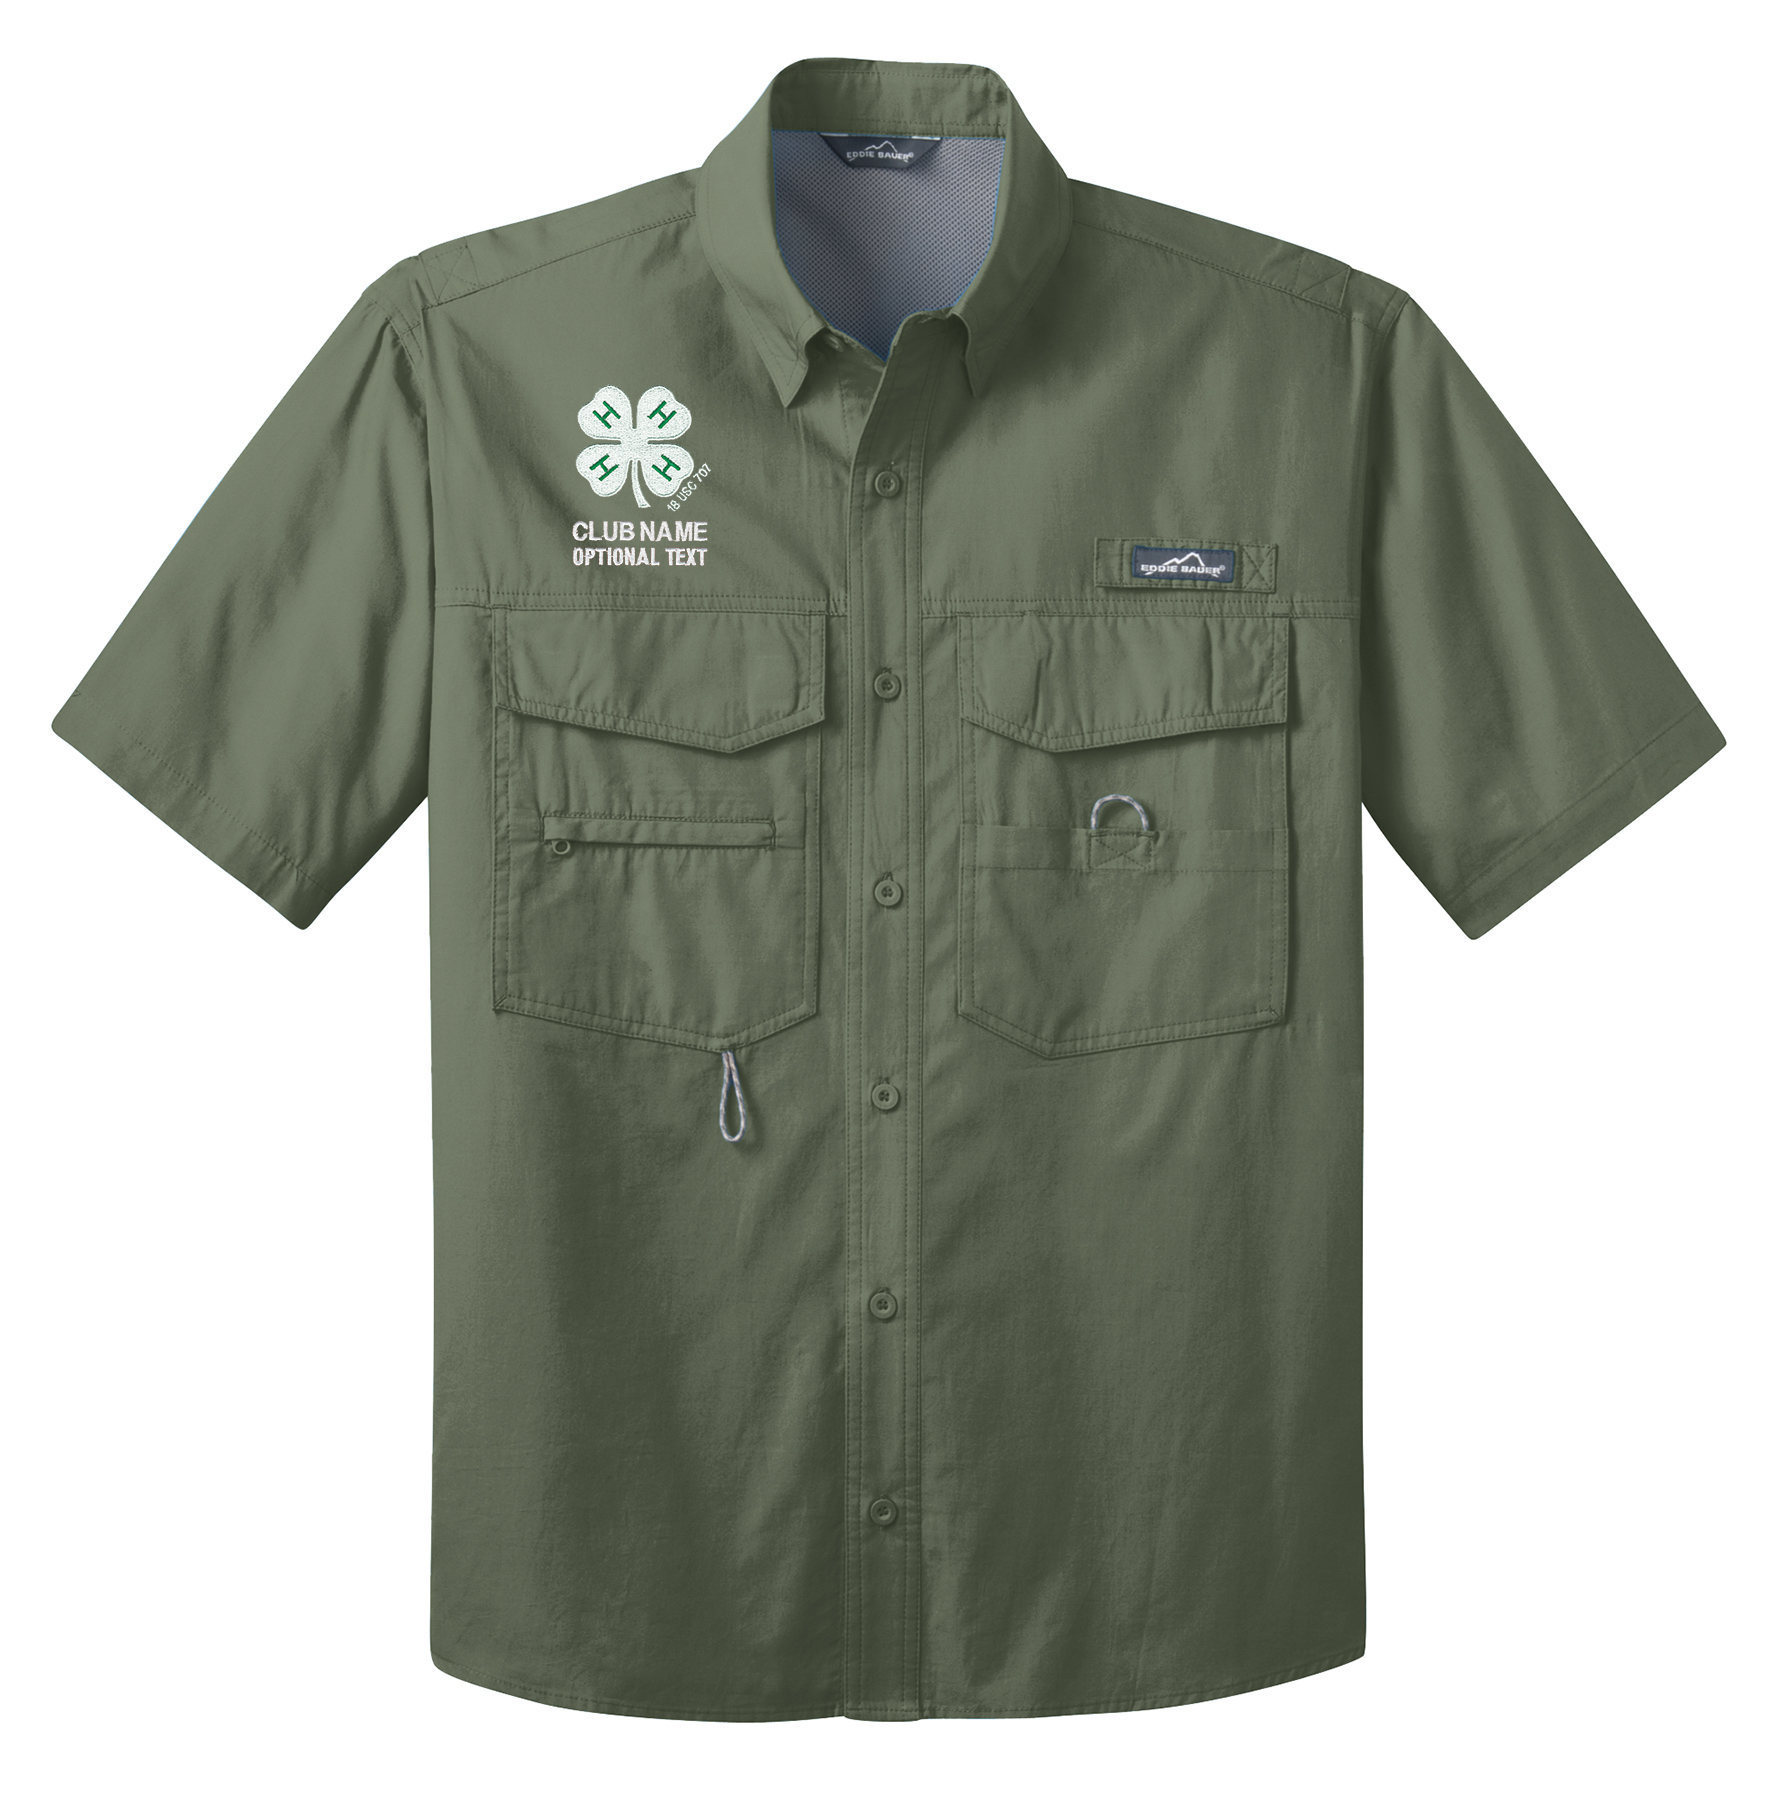 Eddie Bauer – Short Sleeve Fishing Shirt with Embroidered 4-H Logo - Seagrass Green, 3X Large